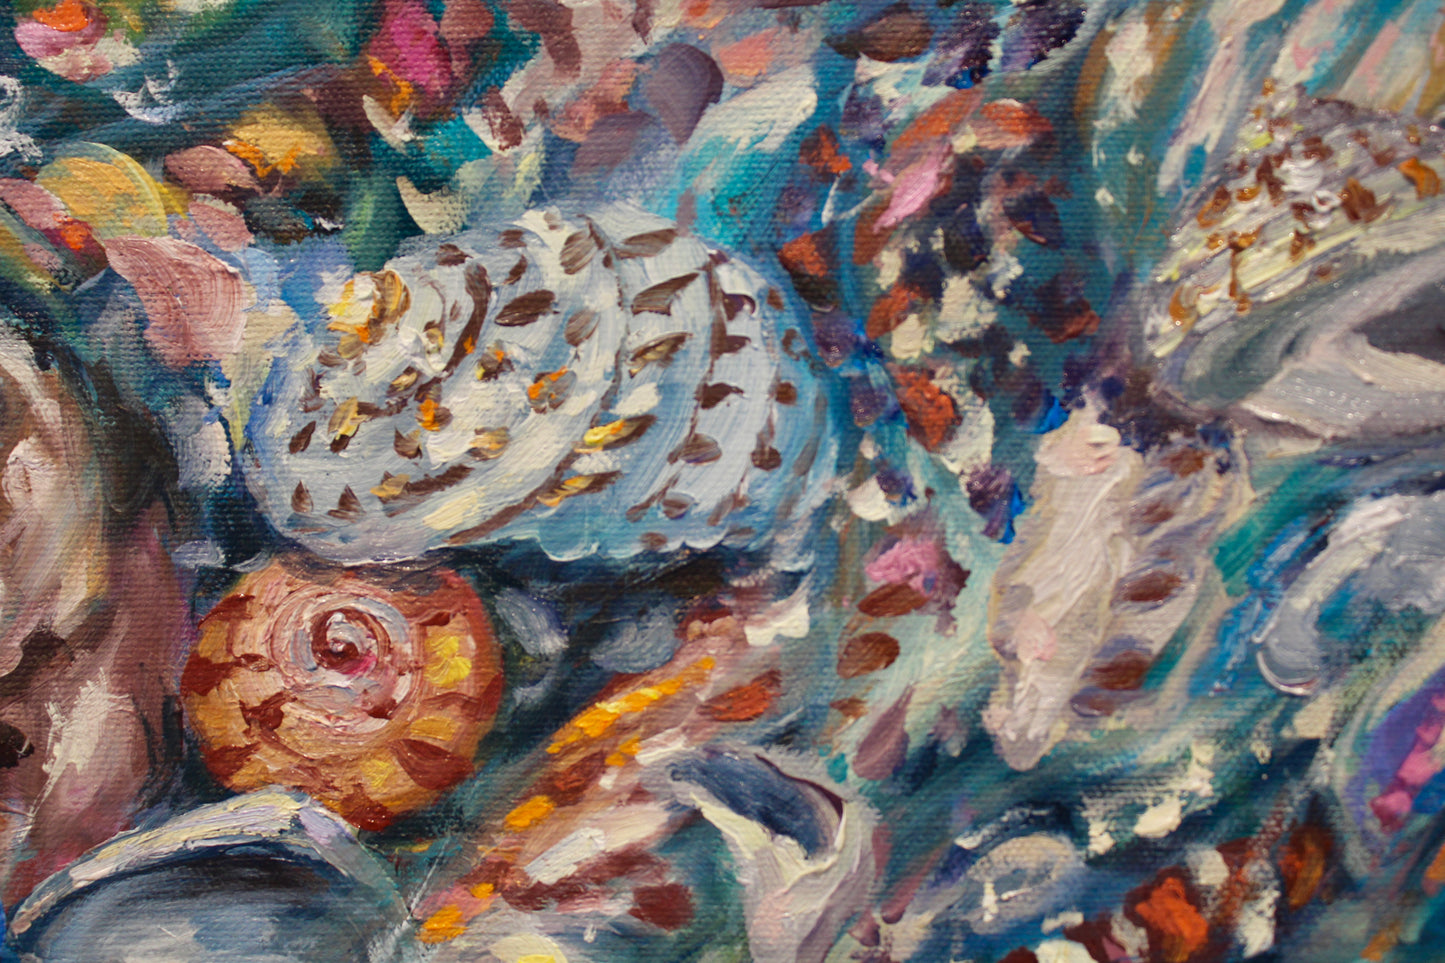 Tide Pool V, An Original 32" x 38" Highly Detailed Seashell Oil Painting On Canvas With Turquoise Water